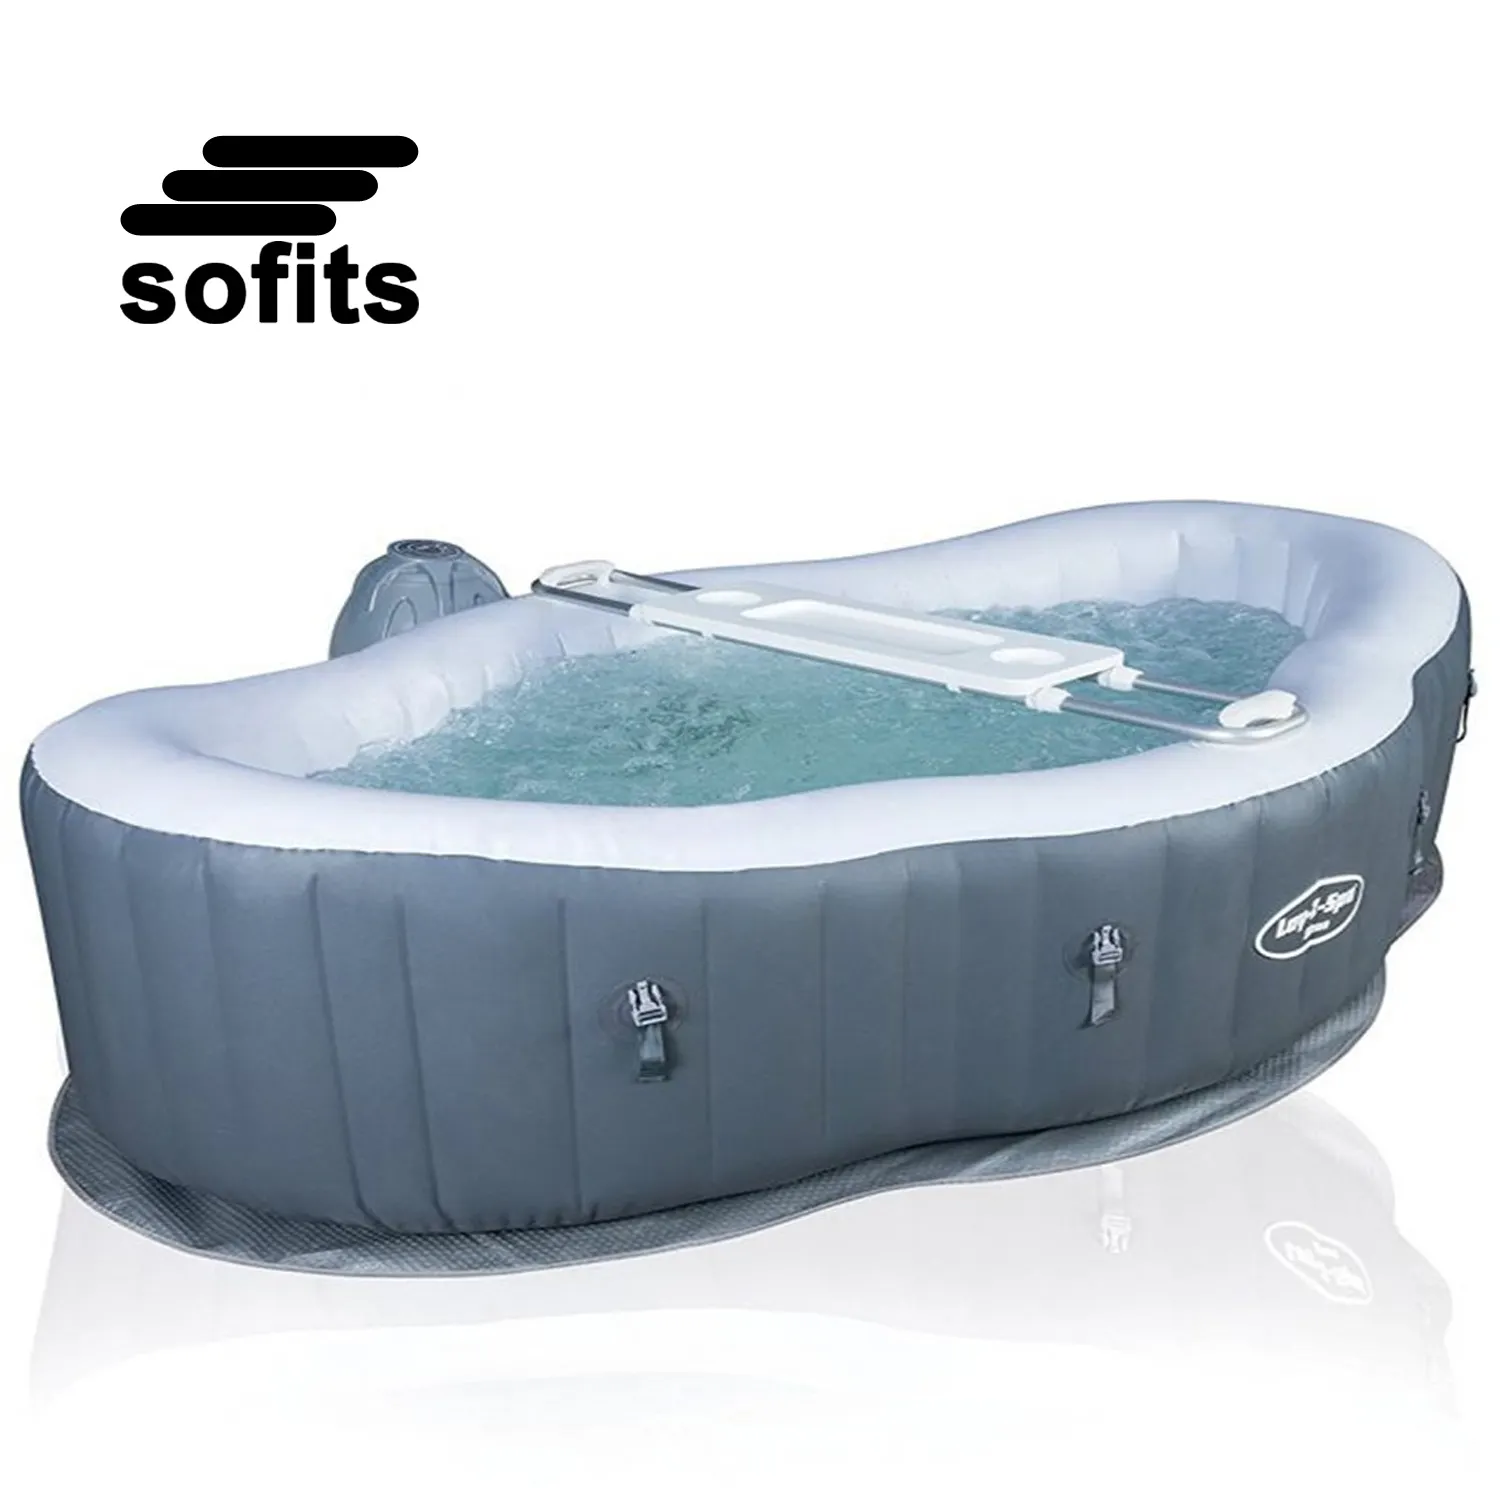 <span class=keywords><strong>Bestway</strong></span> 54156 Siena AirJet aufblasbare oval whirlpool spa 2 person